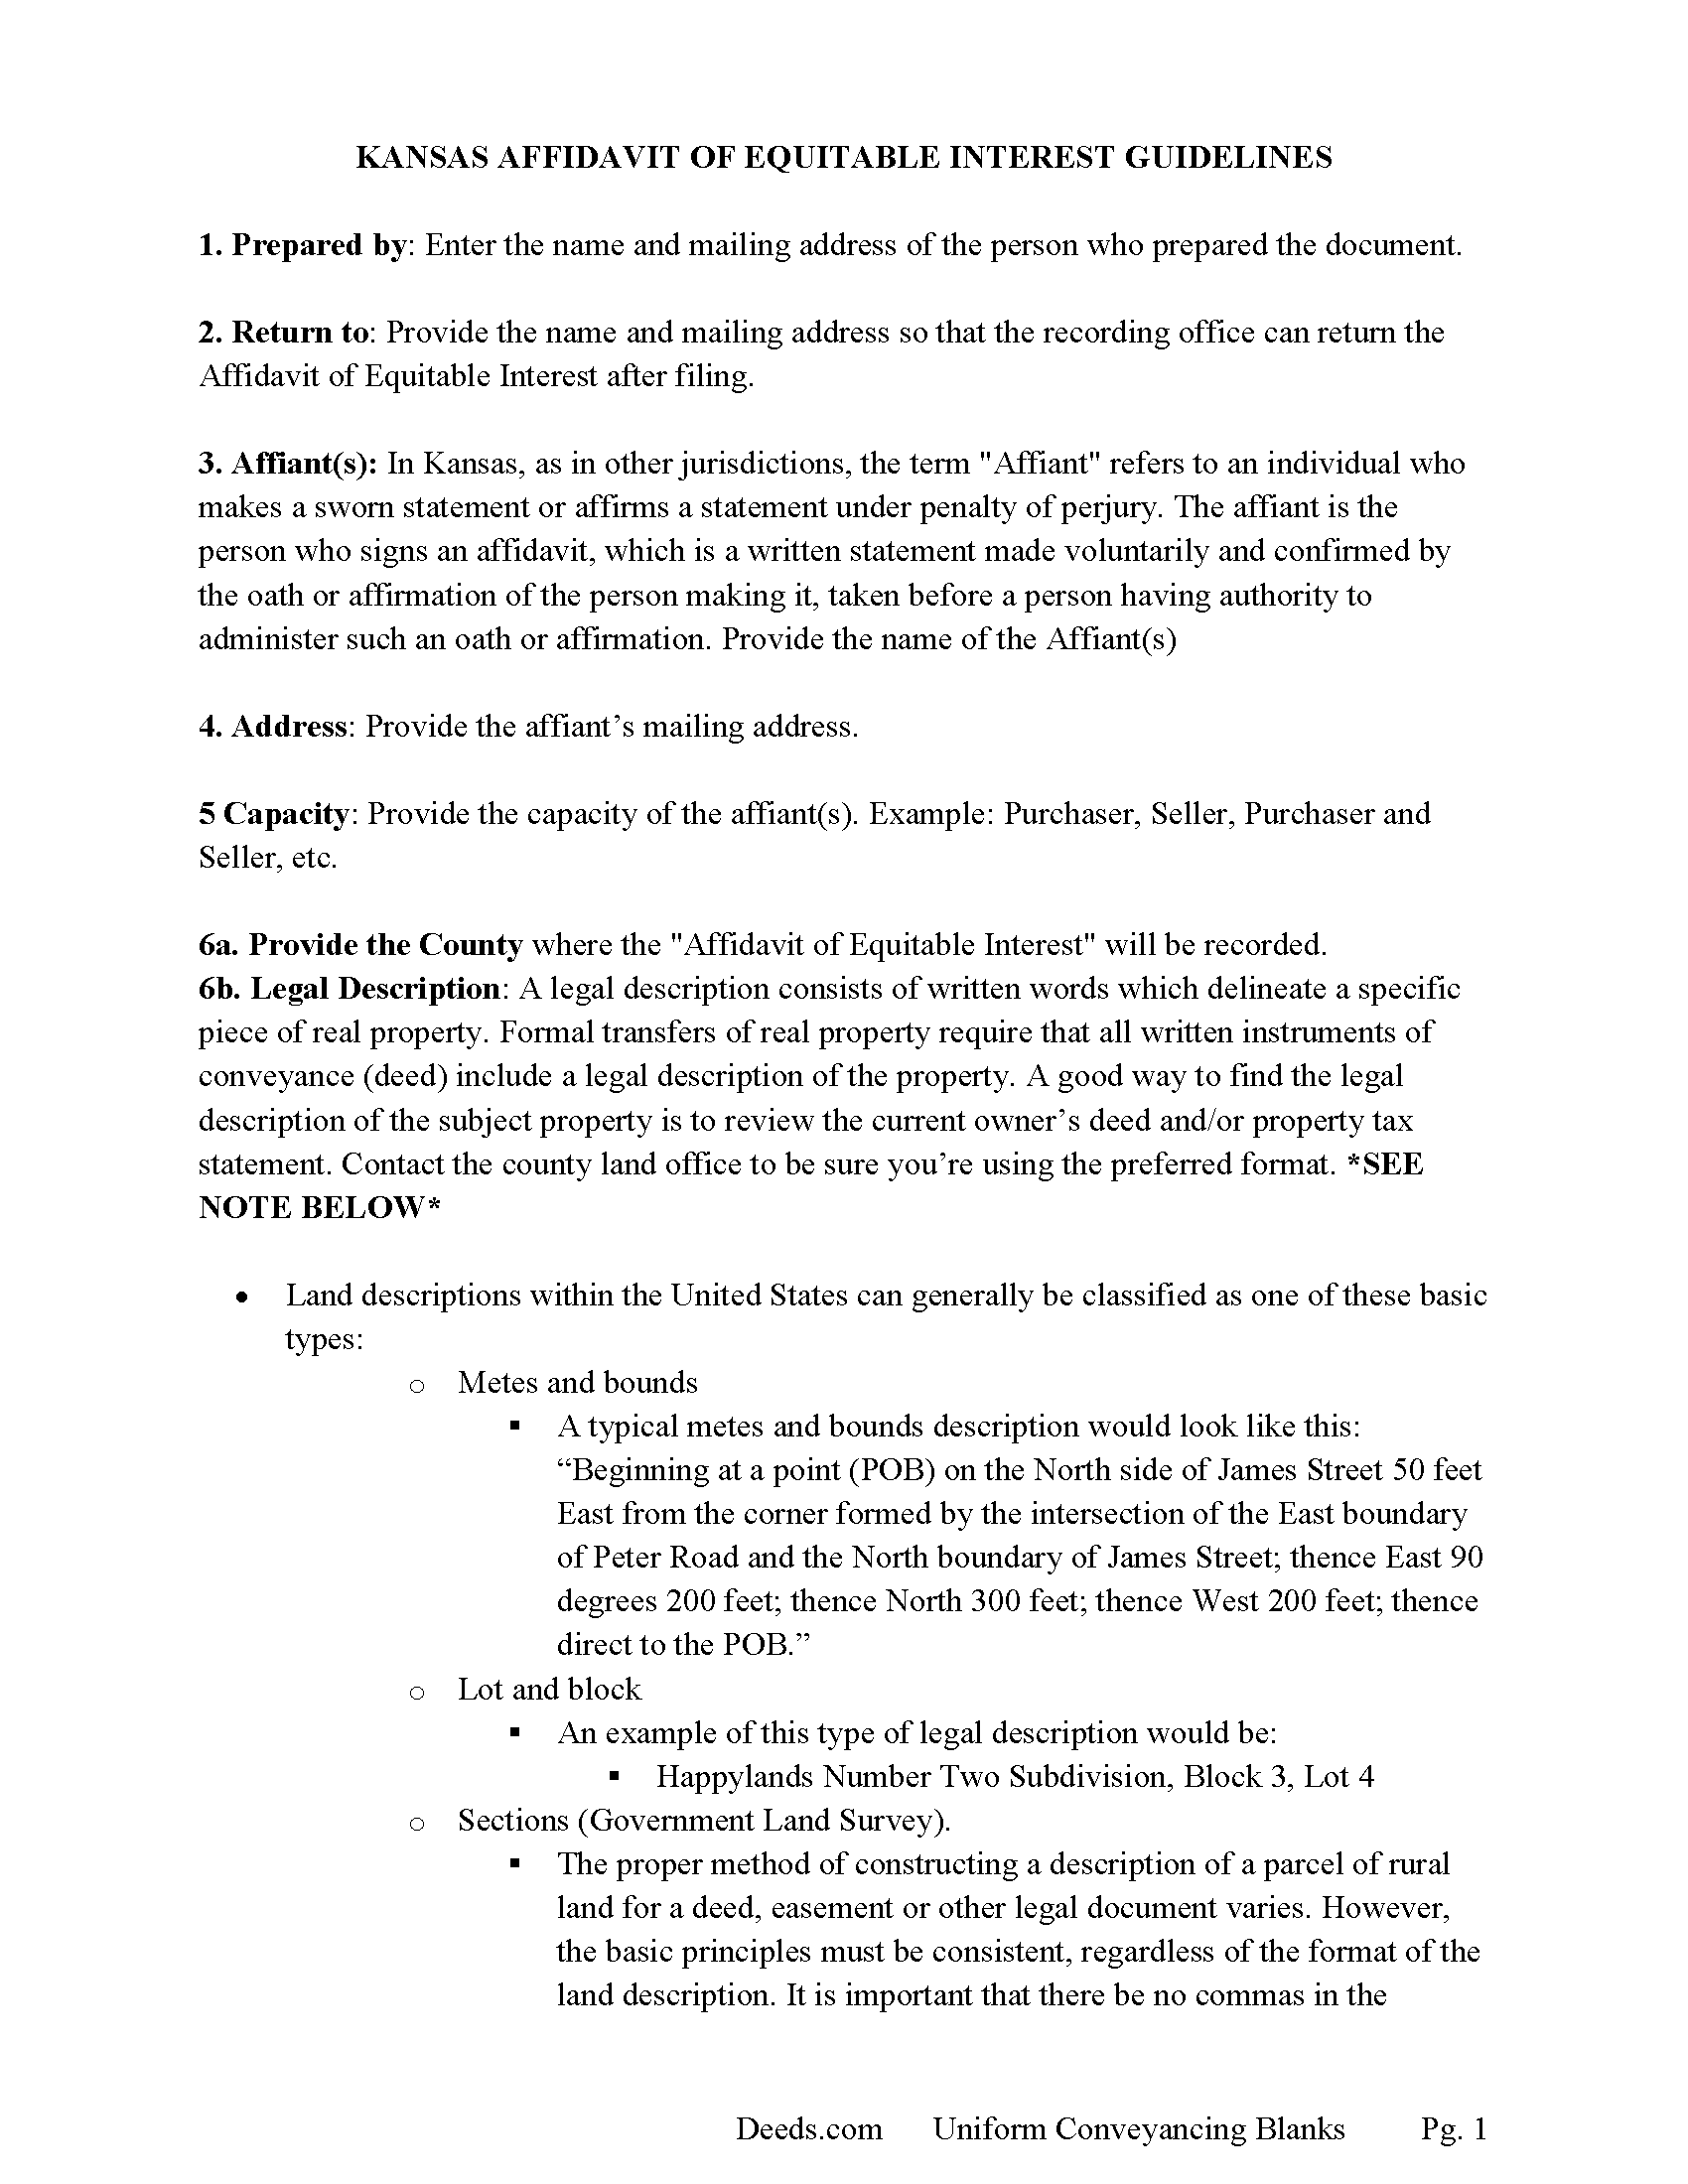 Clay County Affidavit for Equitable Interest Guide